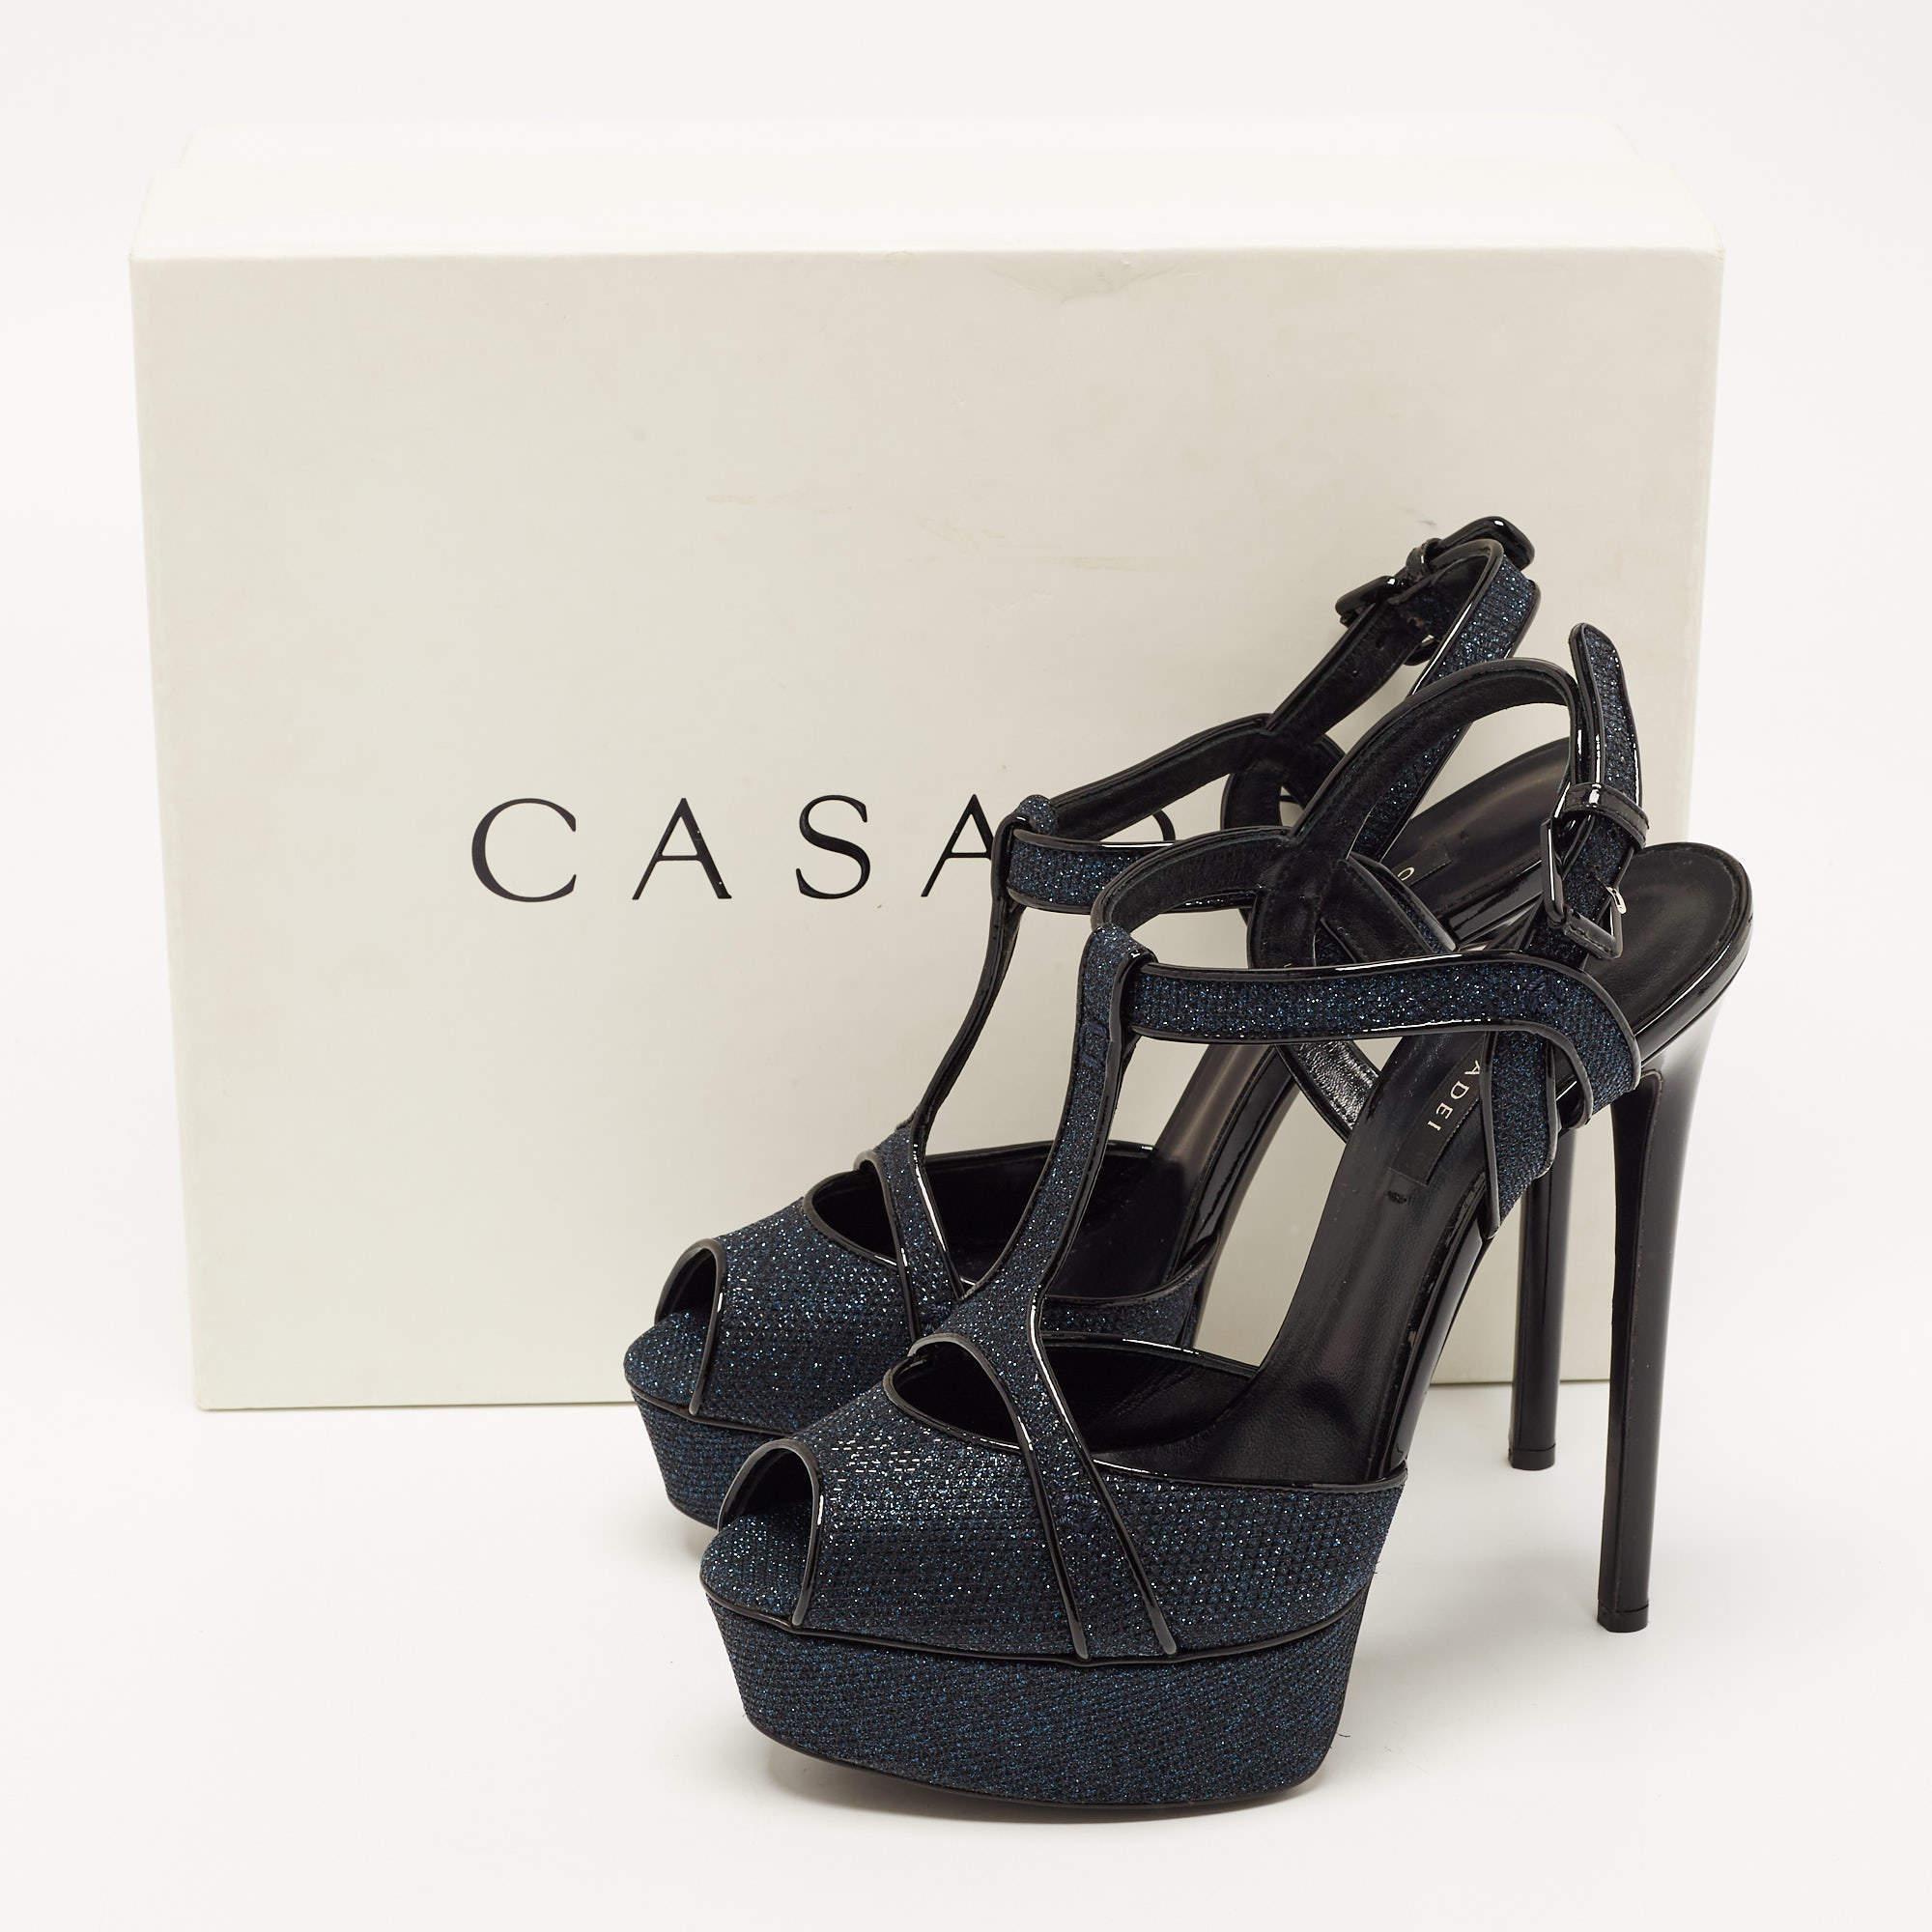 Casadei Glitter Lace and Patent Leather Platform Ankle Strap Sandals Size 40 3